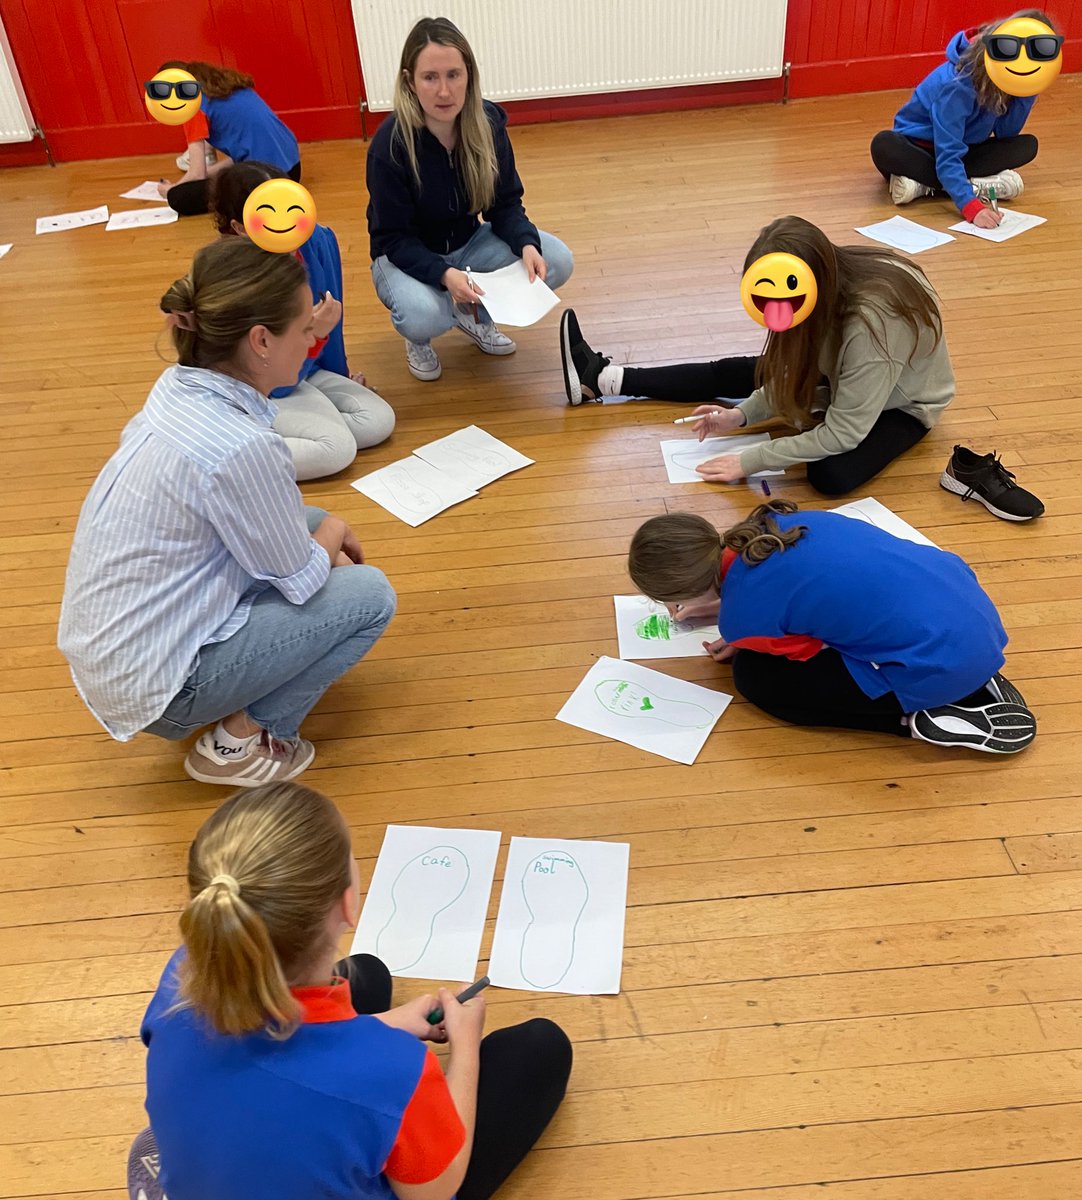 Had a great night with @Avrilfjrae @StonehouseGG! We welcomed Kate from @CommEnterprise who helped Guides come up with ideas for Stonehouse’s future Village Plan as part of our @GirlguidingScot #TakeAction badge. 

#Community #VillageLife #PlaceBased #Planning #STEM @Girlguiding